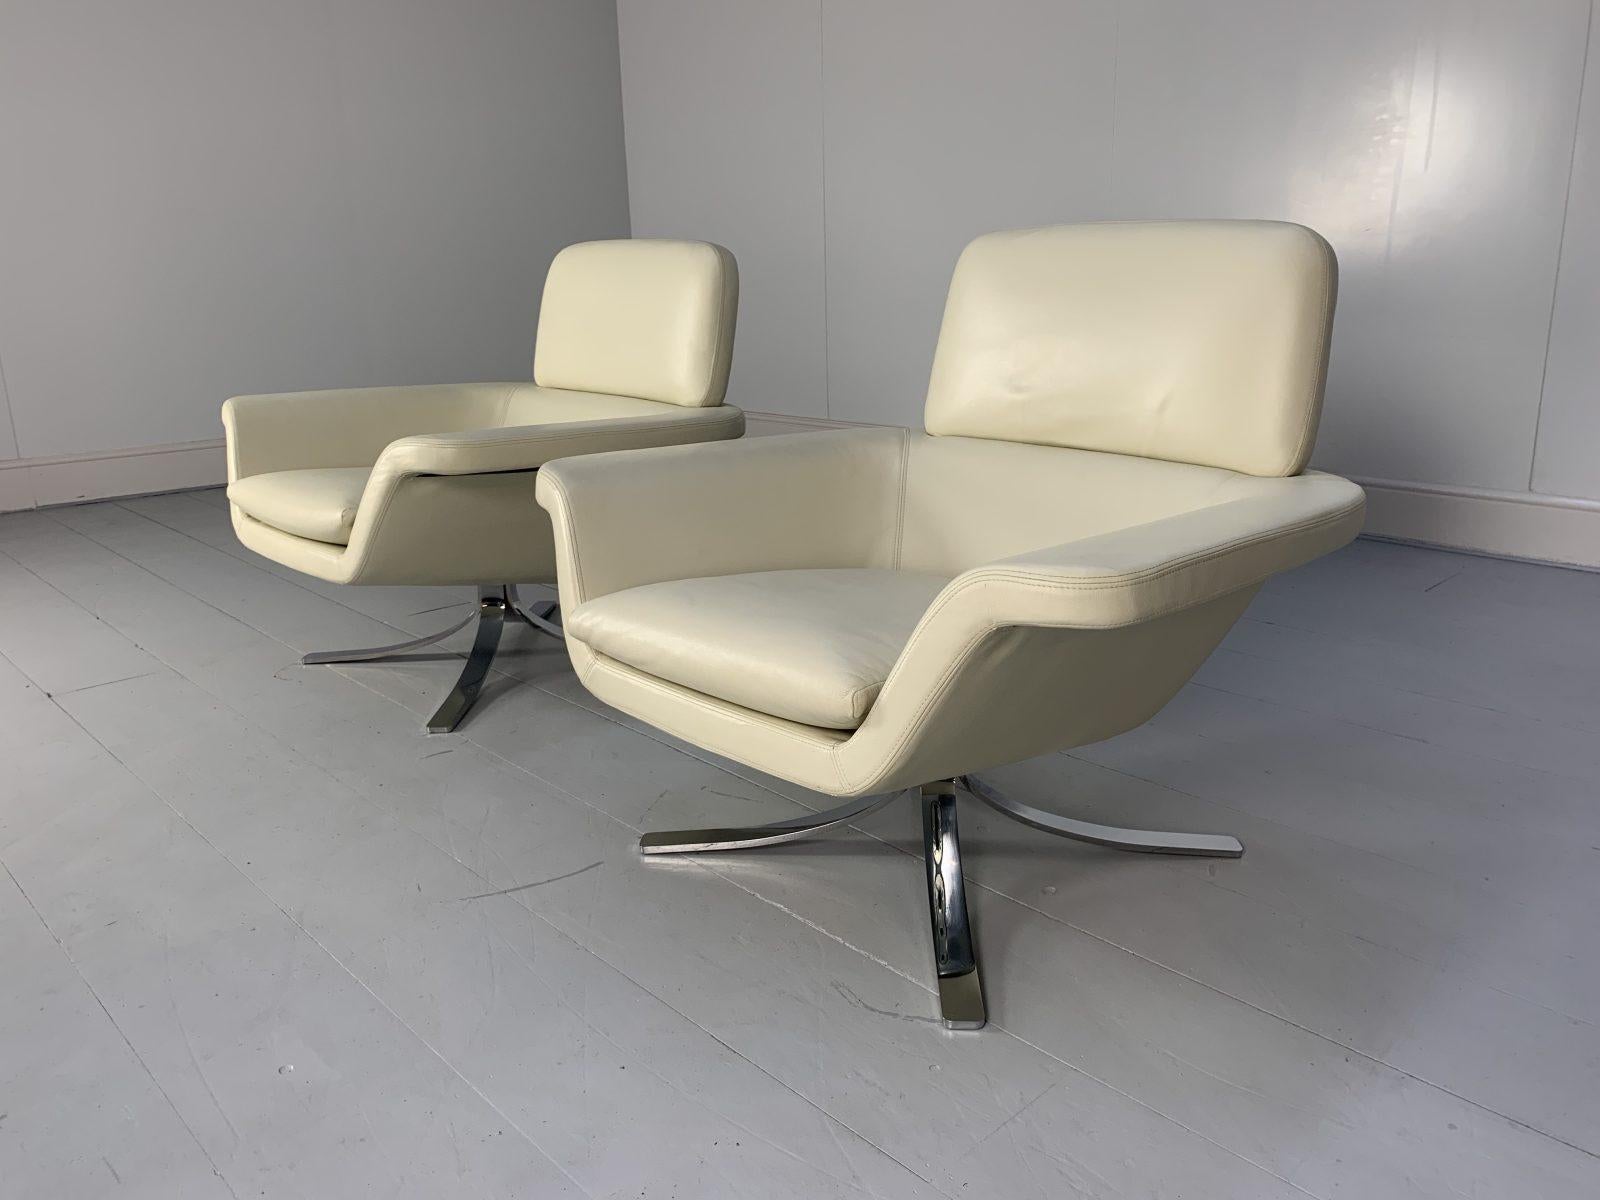 Minotti “Blake Soft” Armchairs, in Ivory Leather 3